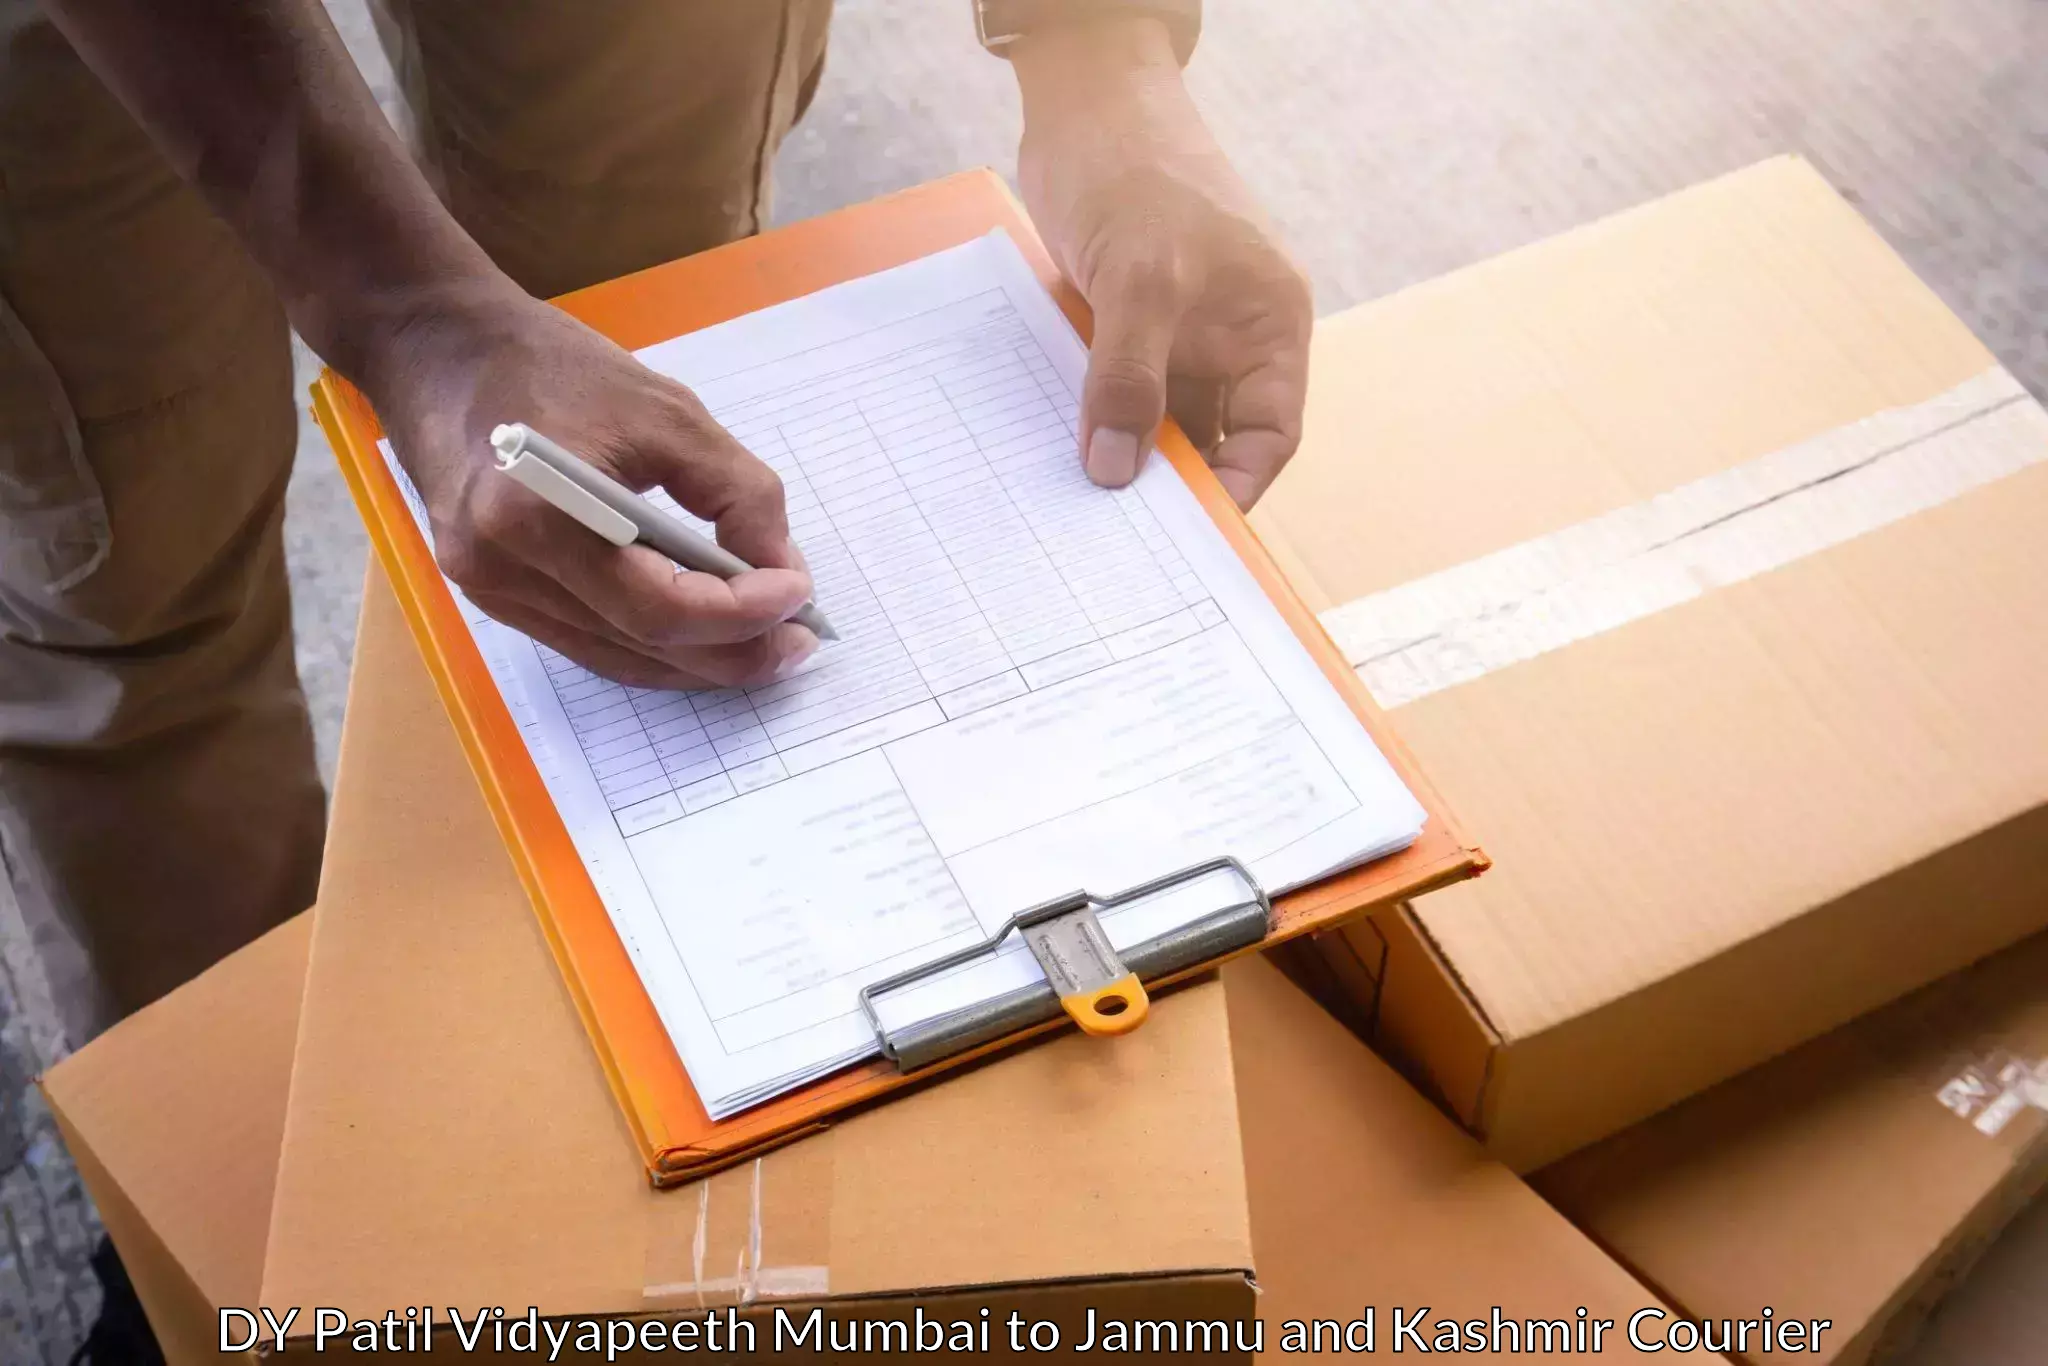 Reliable freight solutions in DY Patil Vidyapeeth Mumbai to University of Jammu